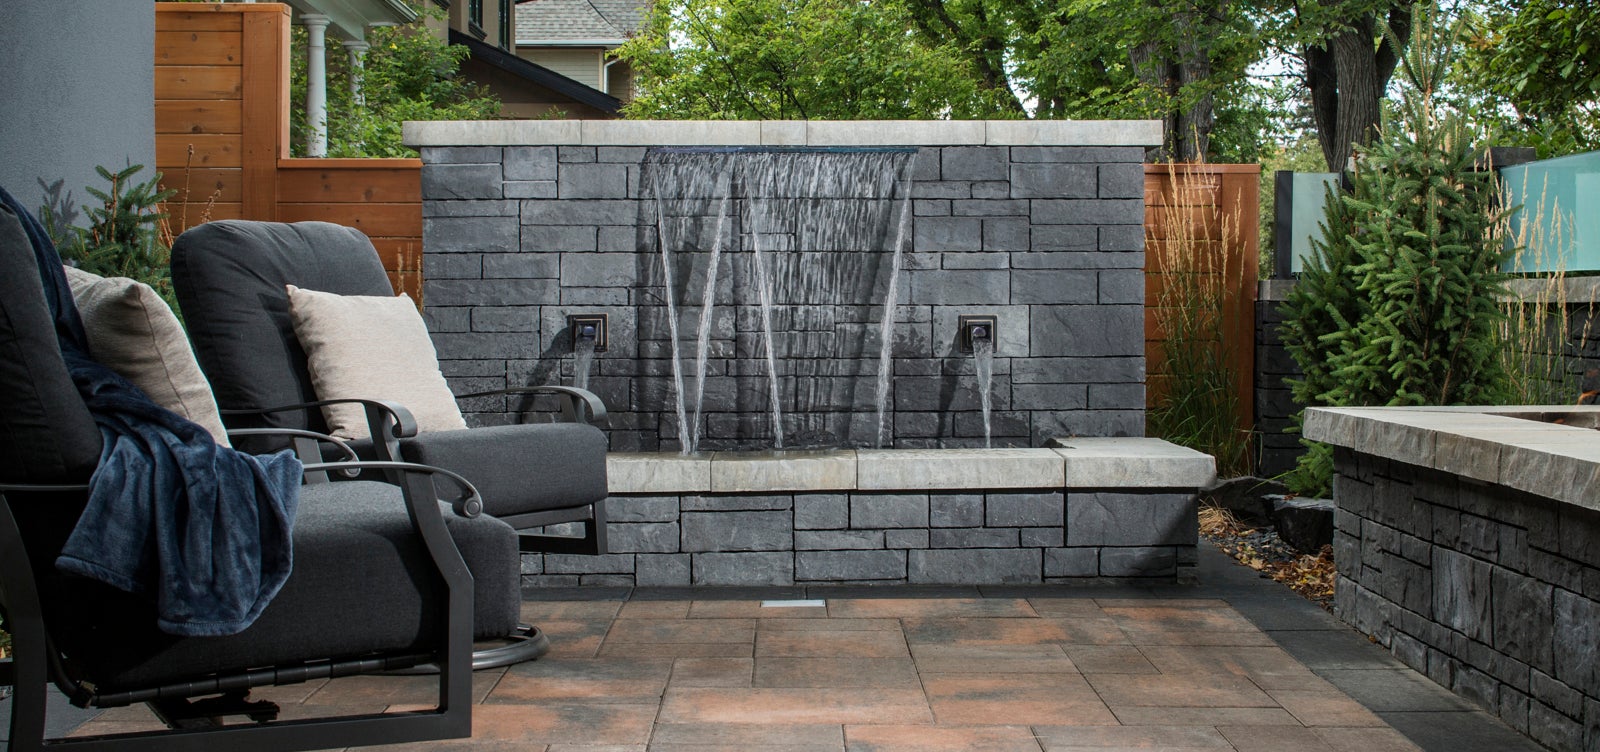 Outdoor Living Space Water Features